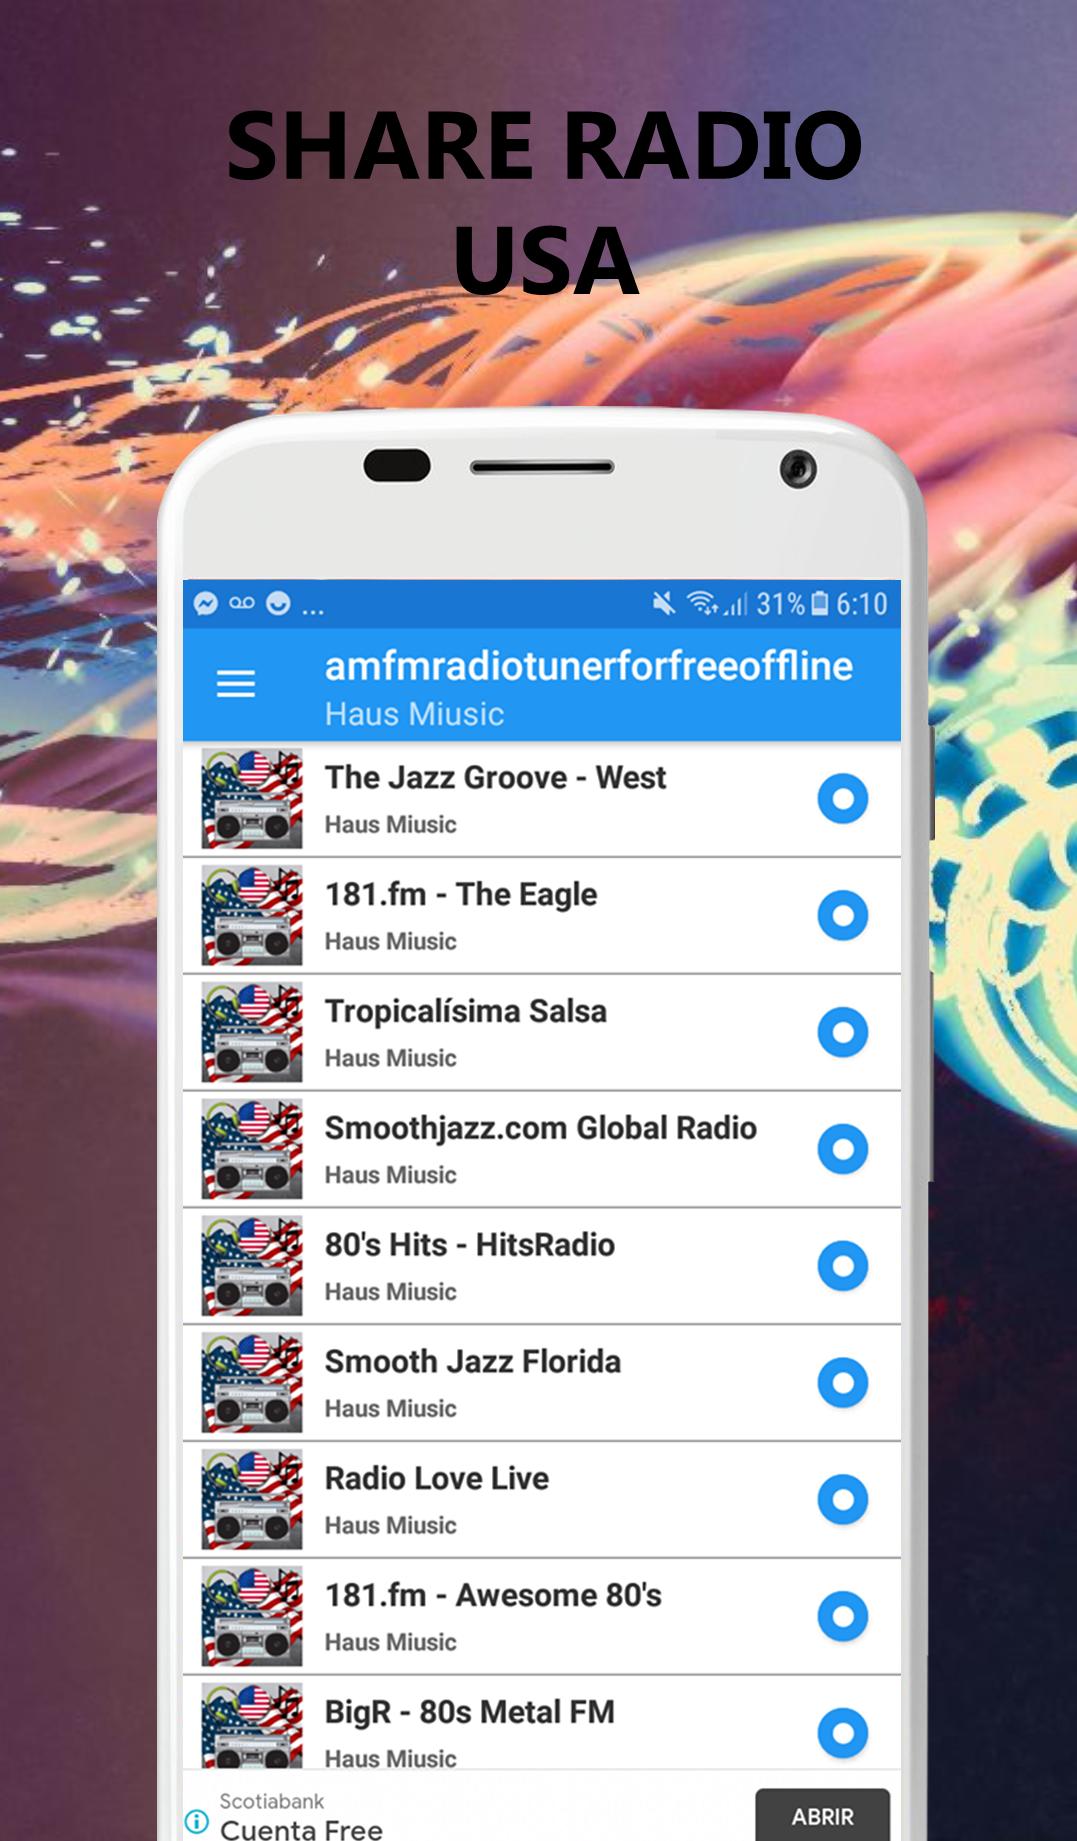 am fm radio tuner for free offline for Android - APK Download